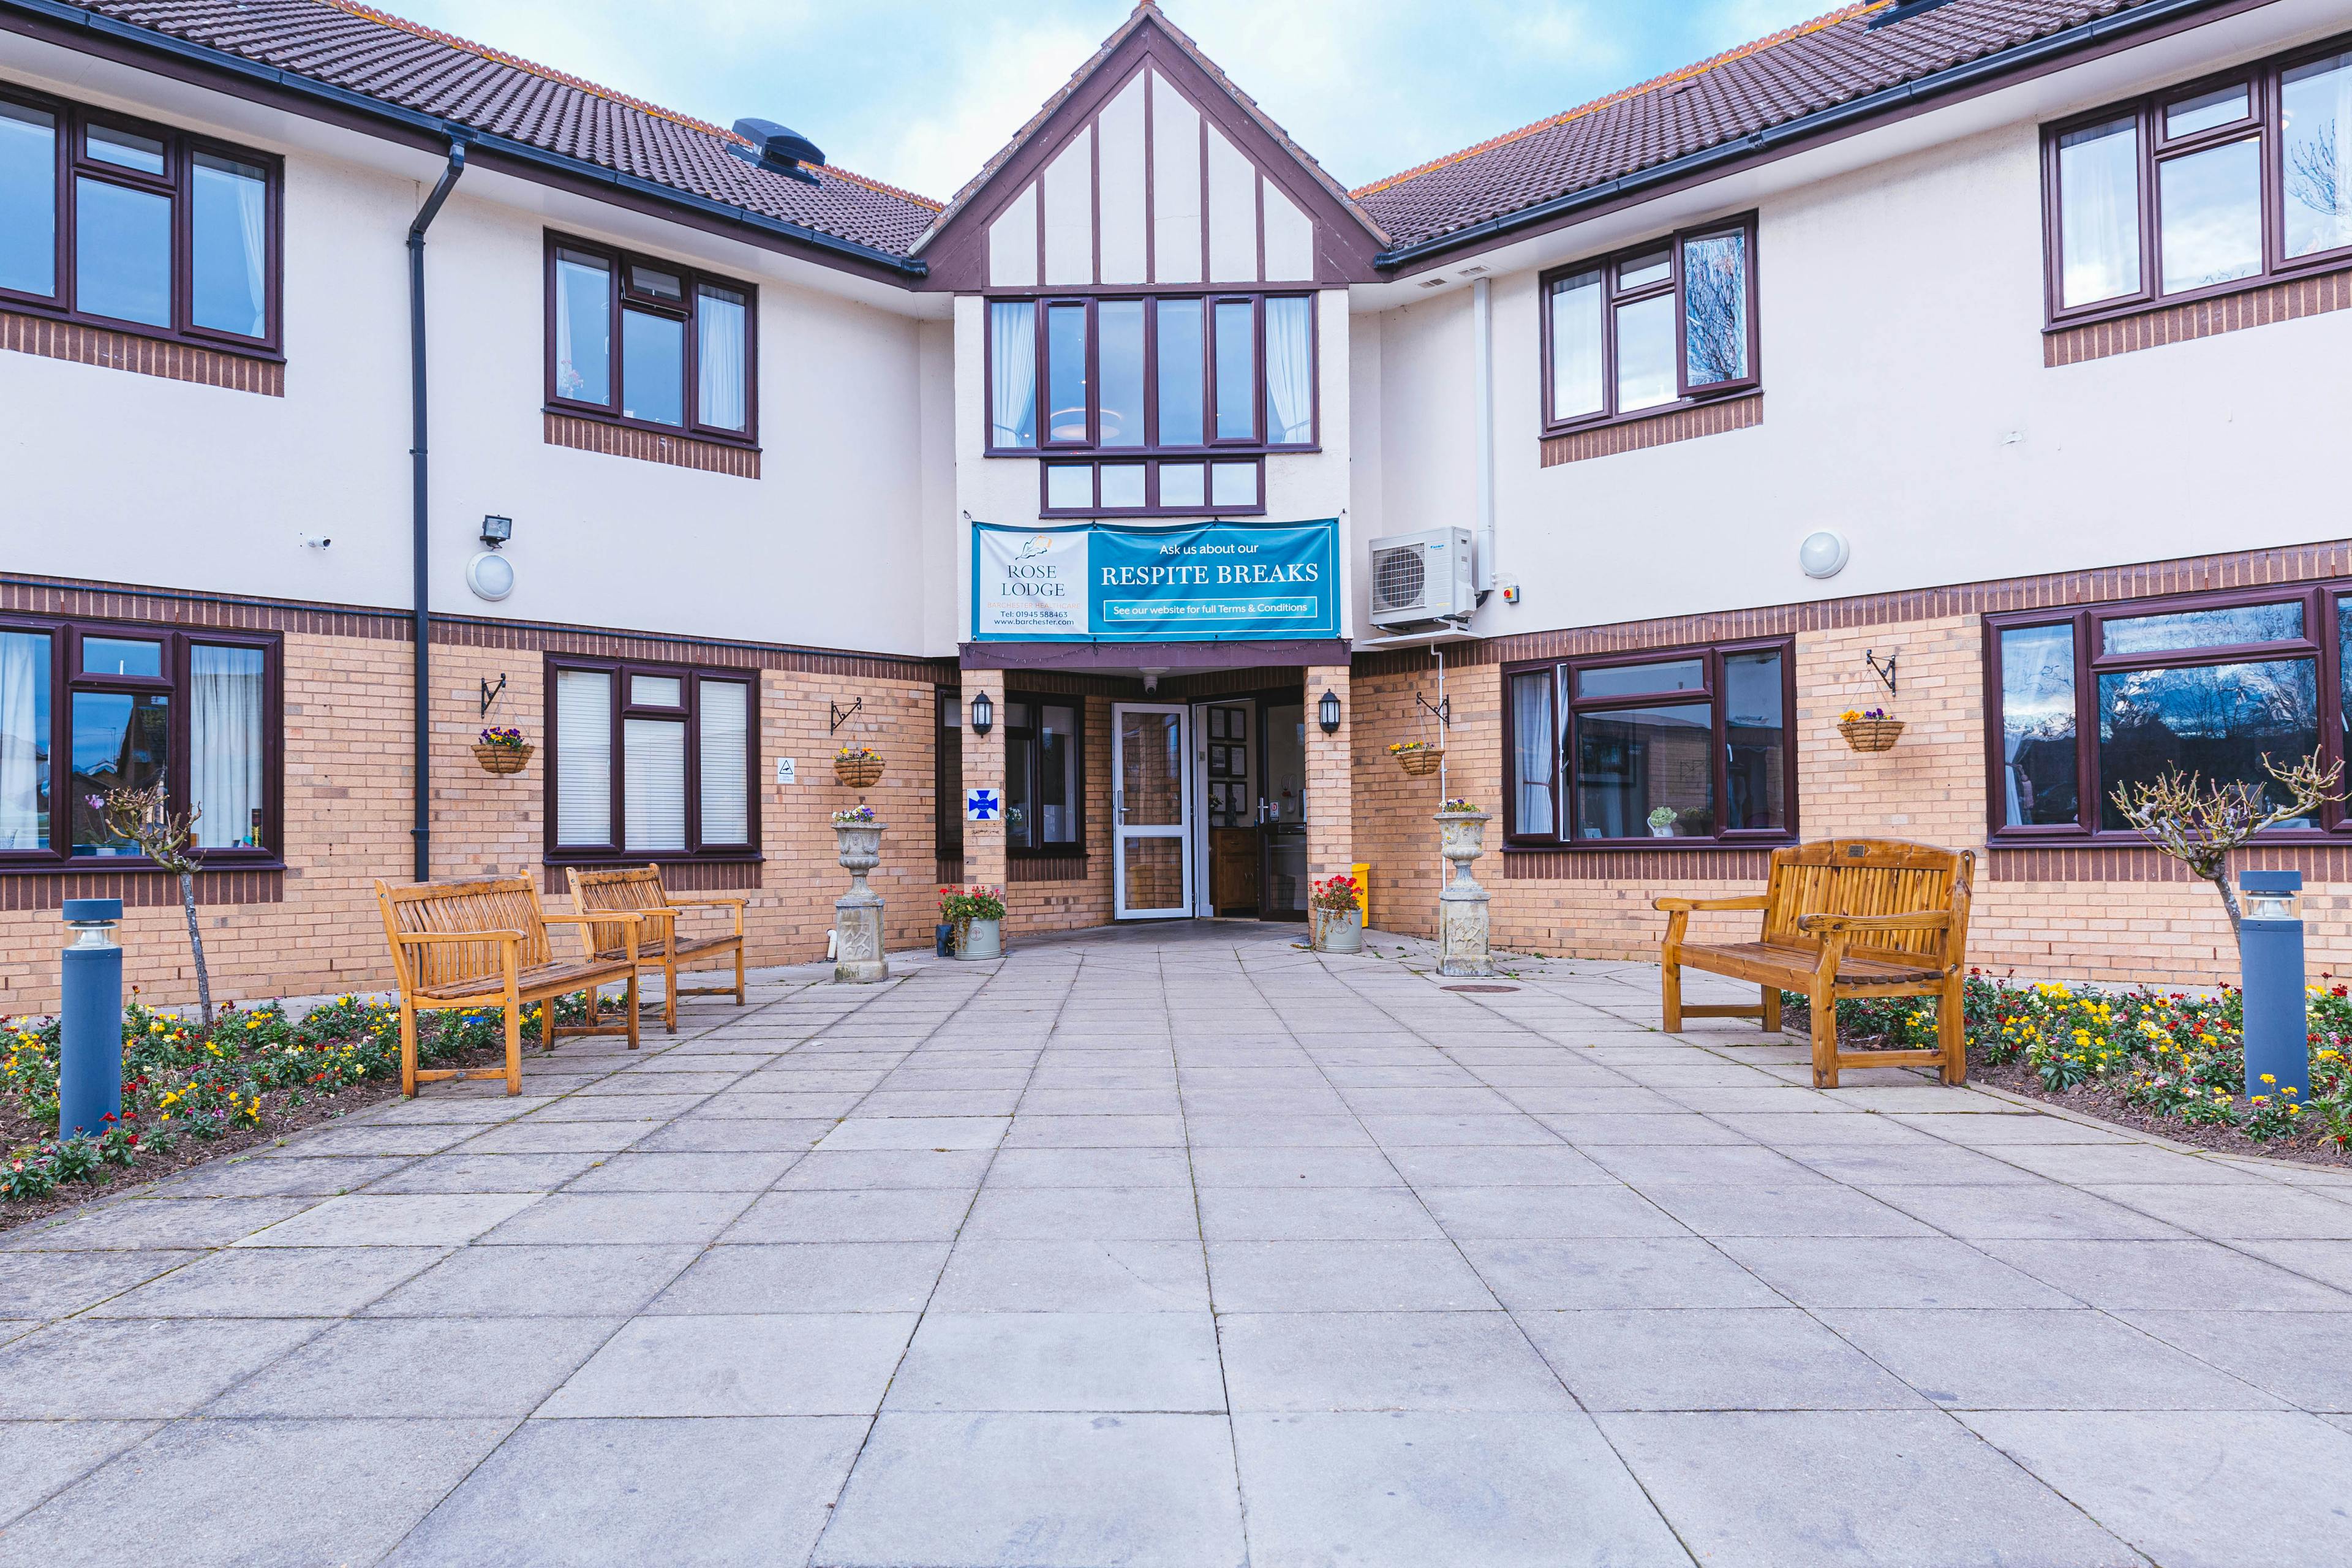 Exterior of Rose Lodge Care Home in Wisbech, Cambridgeshire